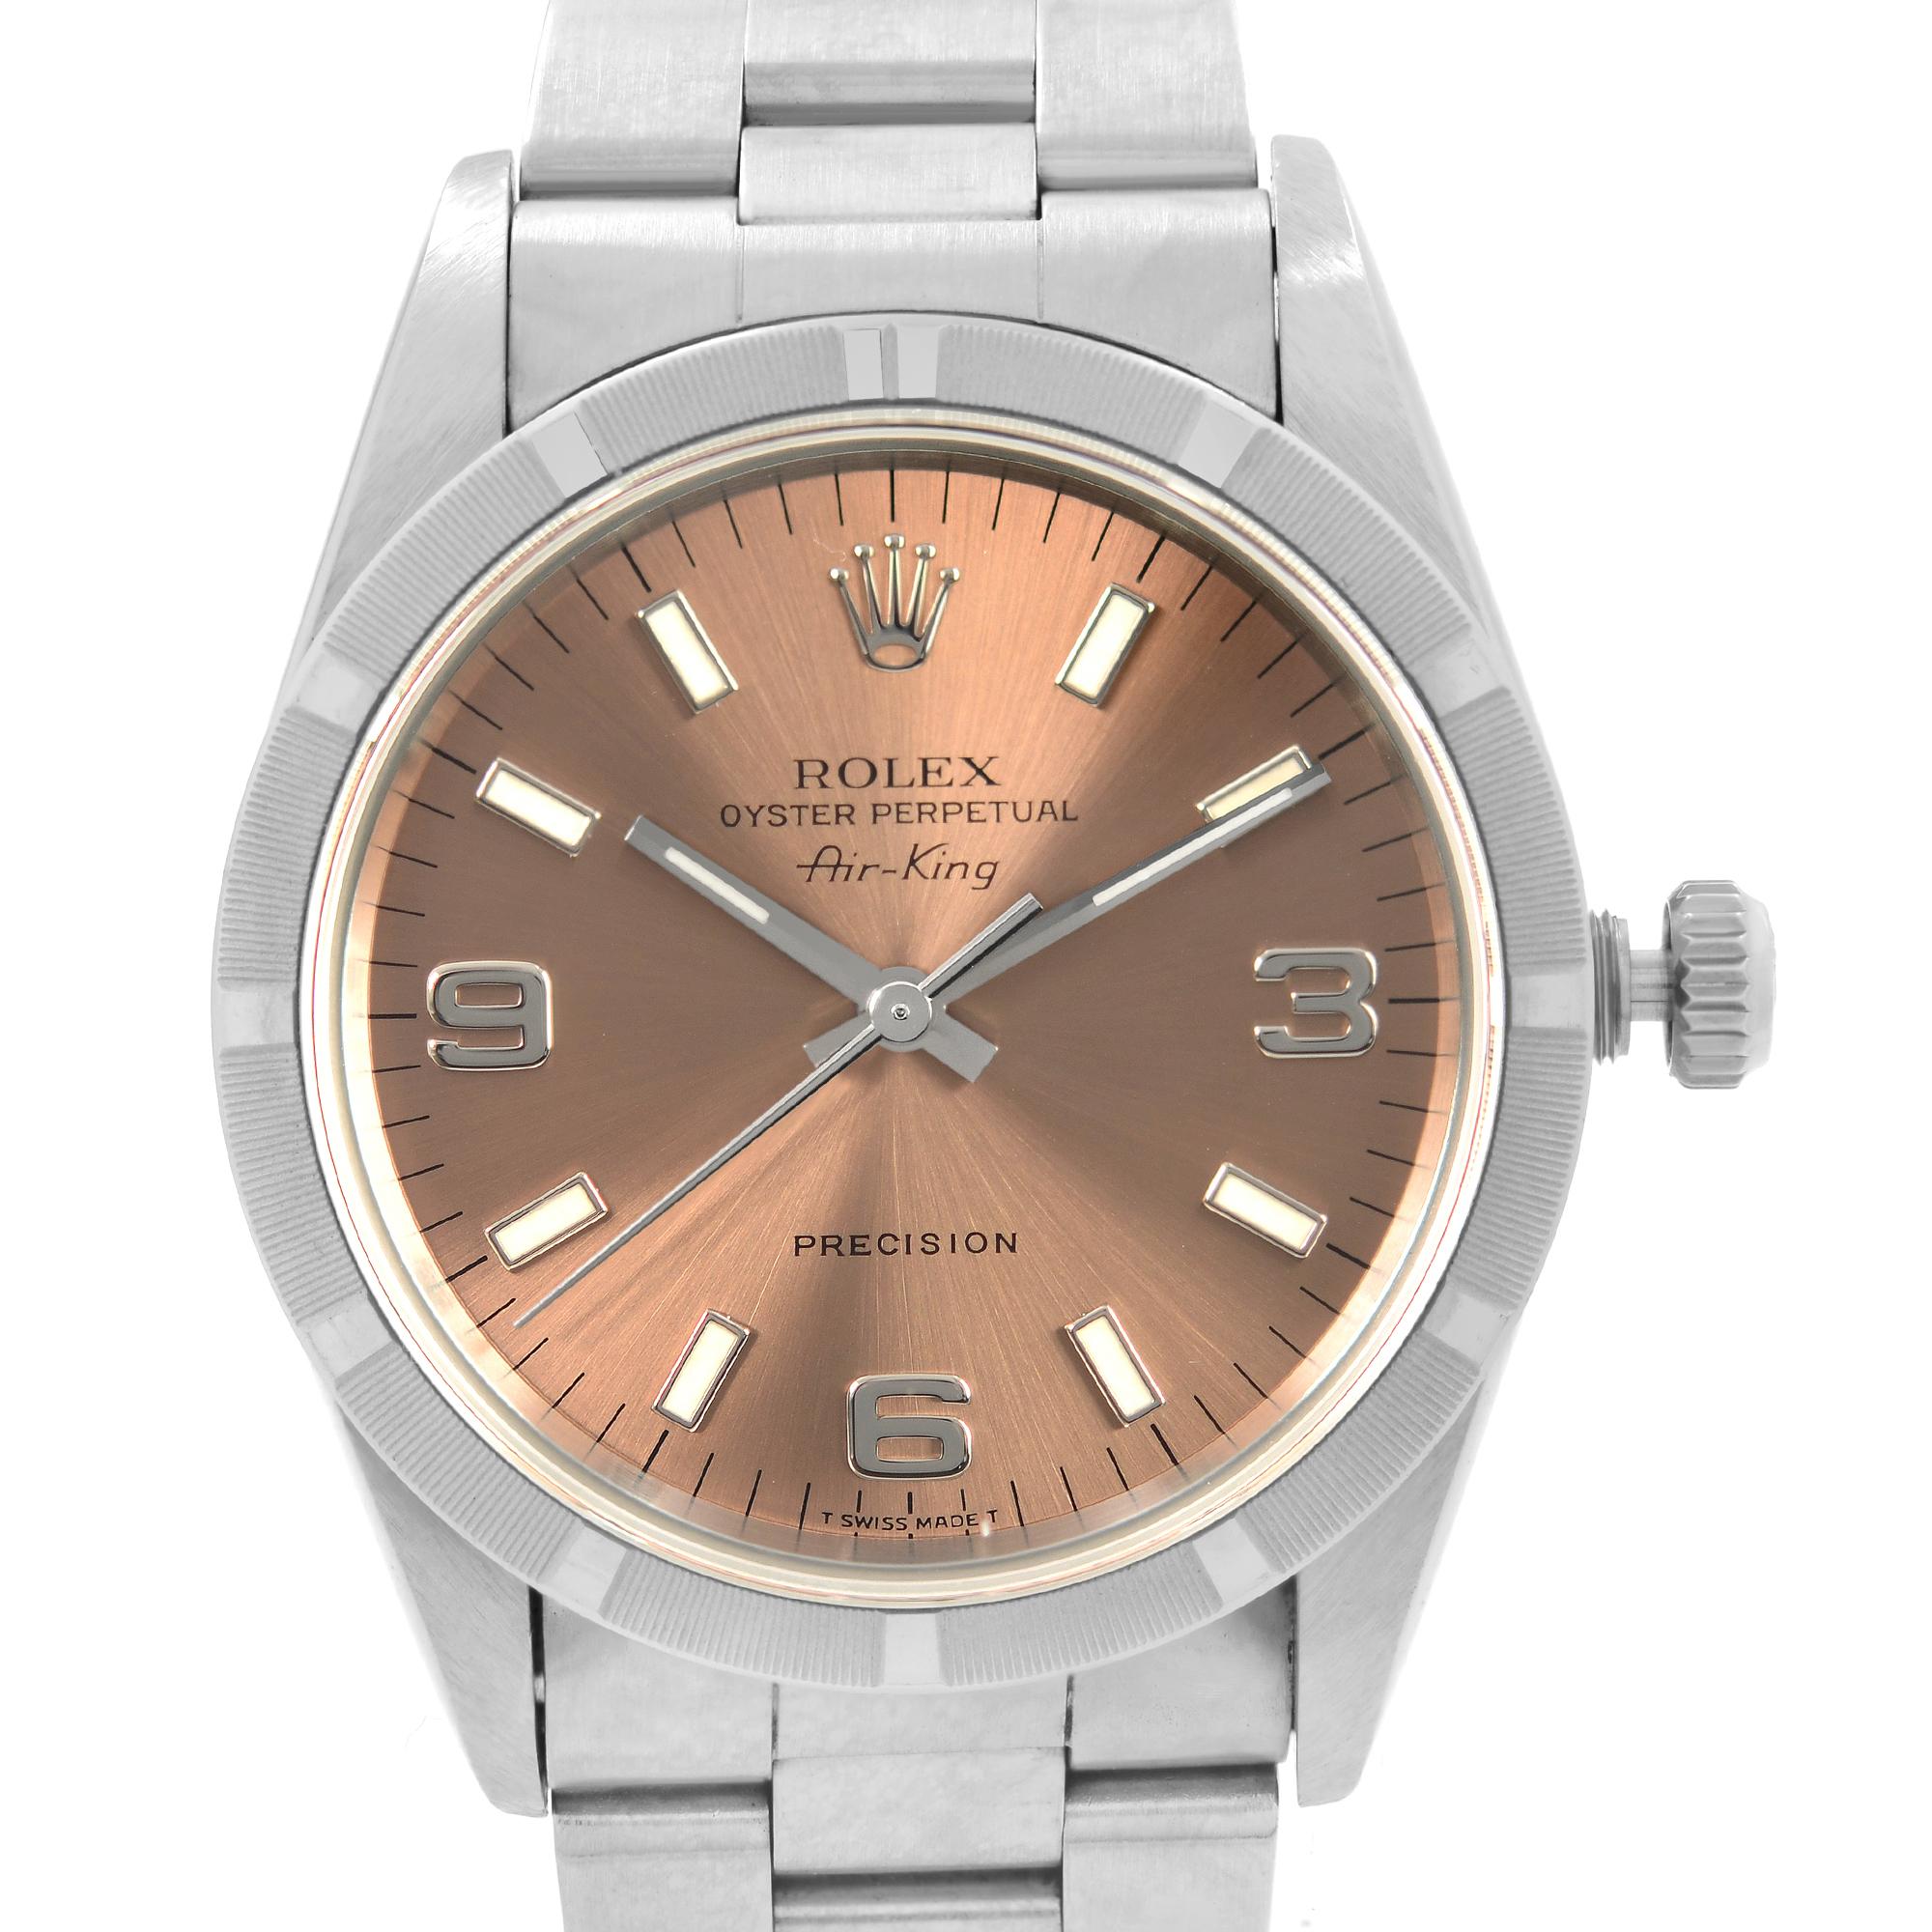 Pre-owned Rolex Air-King 34mm No holes case Stainless Steel Salmon Dial Automatic Men's Watch 14010. This Beautiful Timepiece was Produced in 1996 is Powered by Mechanical ( Automatic ) Movement And Features: Round Stainless Steel Case with a